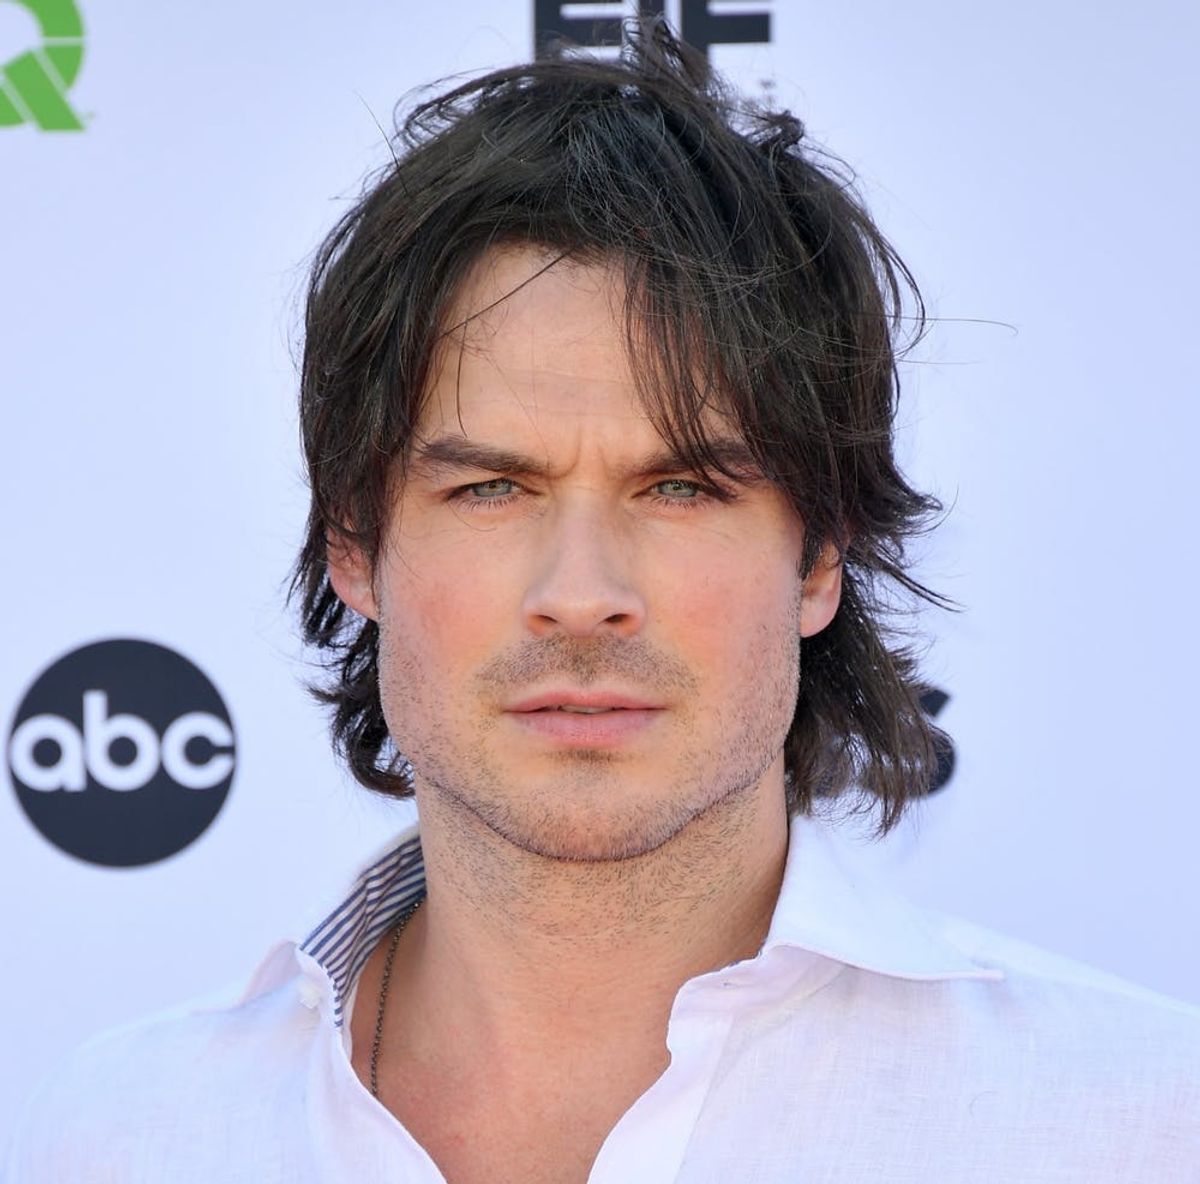 Here’s What Ian Somerhalder Has to Say About That Controversial Birth Control Interview